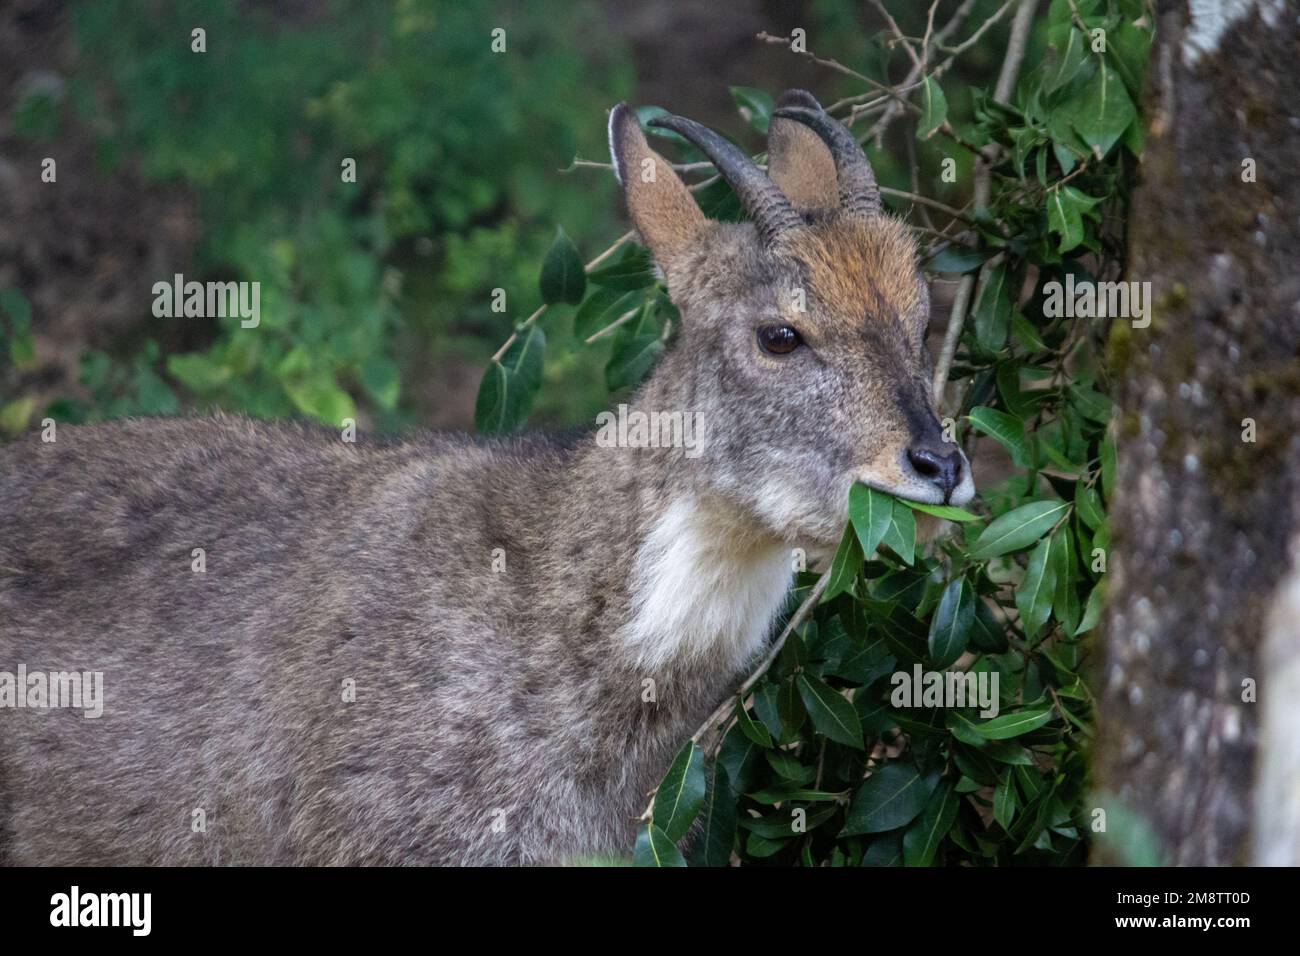 A closeup of a Himalayan goral (Naemorhedus goral)  eating green plant leaves Stock Photo